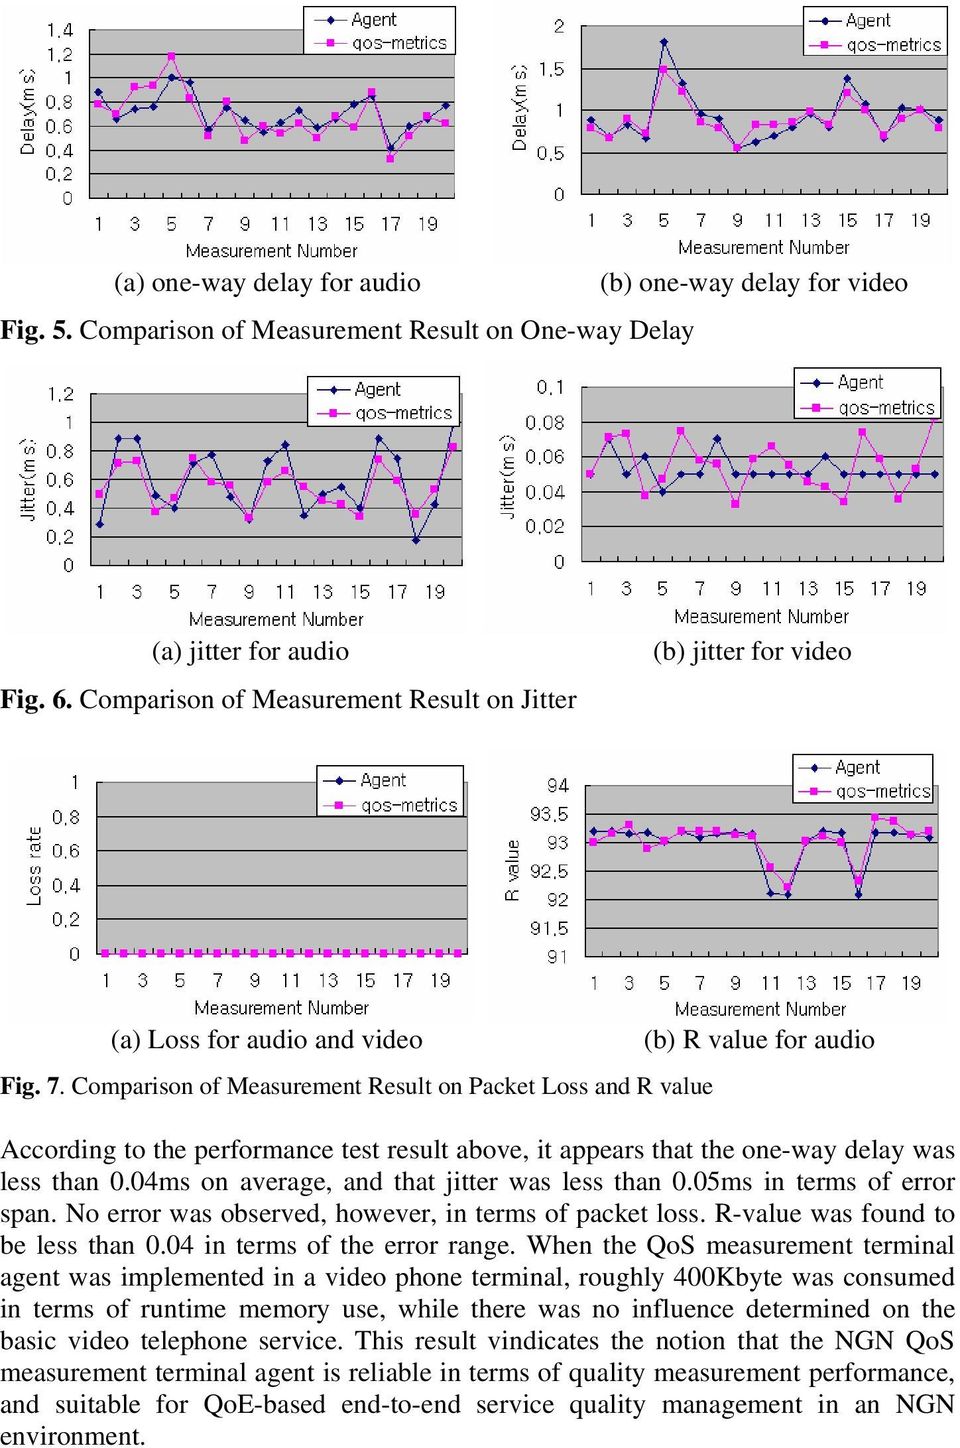 Comparison of Measurement Result on Packet Loss and R value (b) R value for audio According to the performance test result above, it appears that the one-way delay was less than 0.